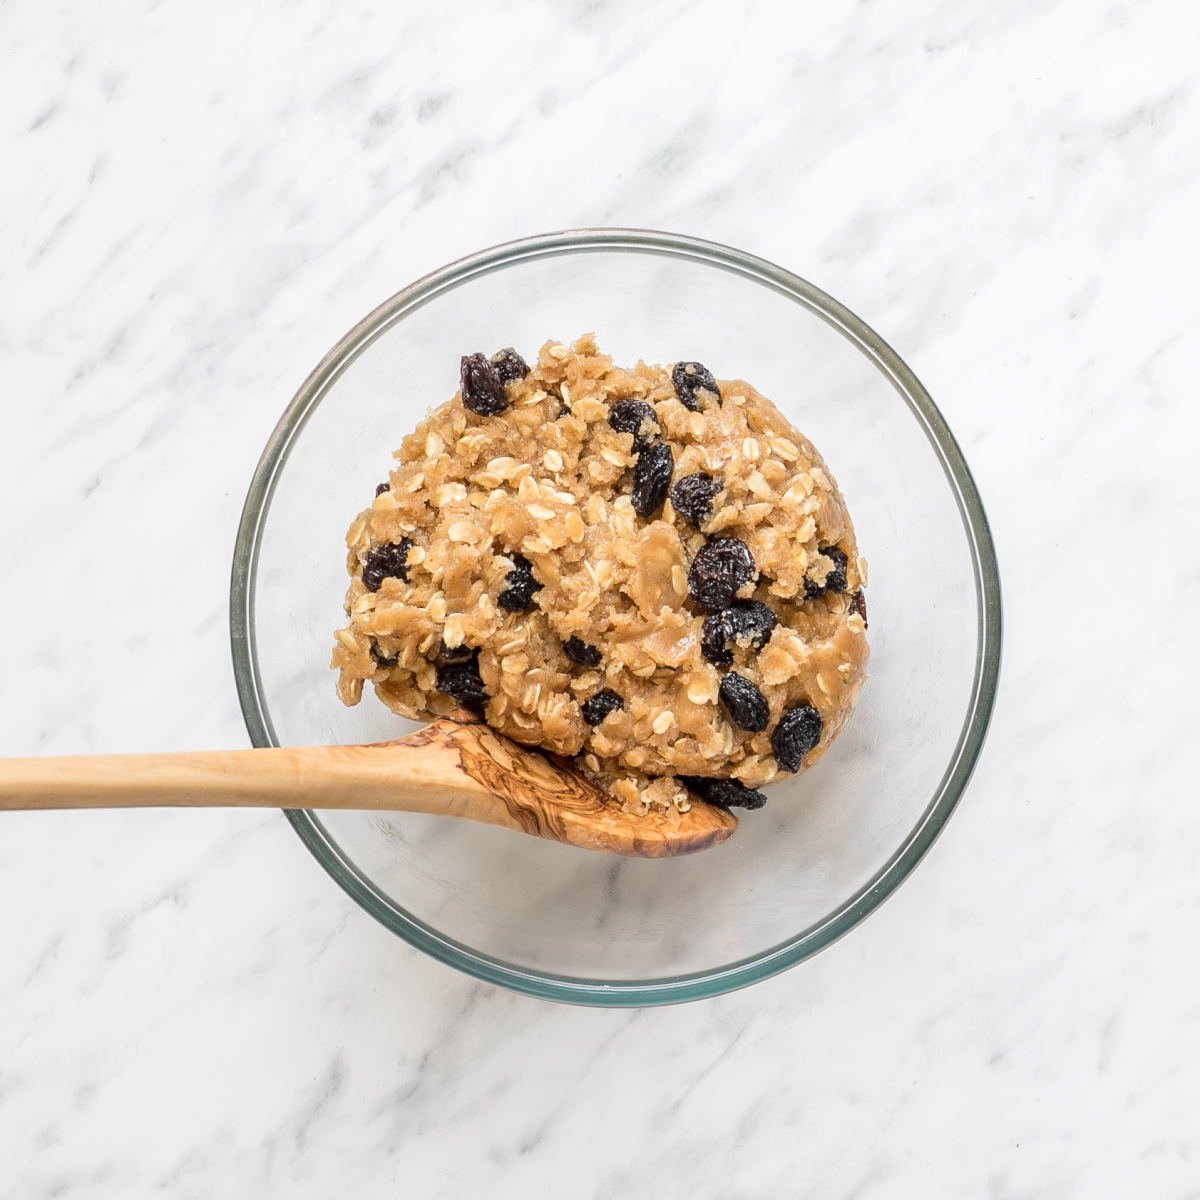 A glass bowl with a light brown cookie batter with oats and raisins.